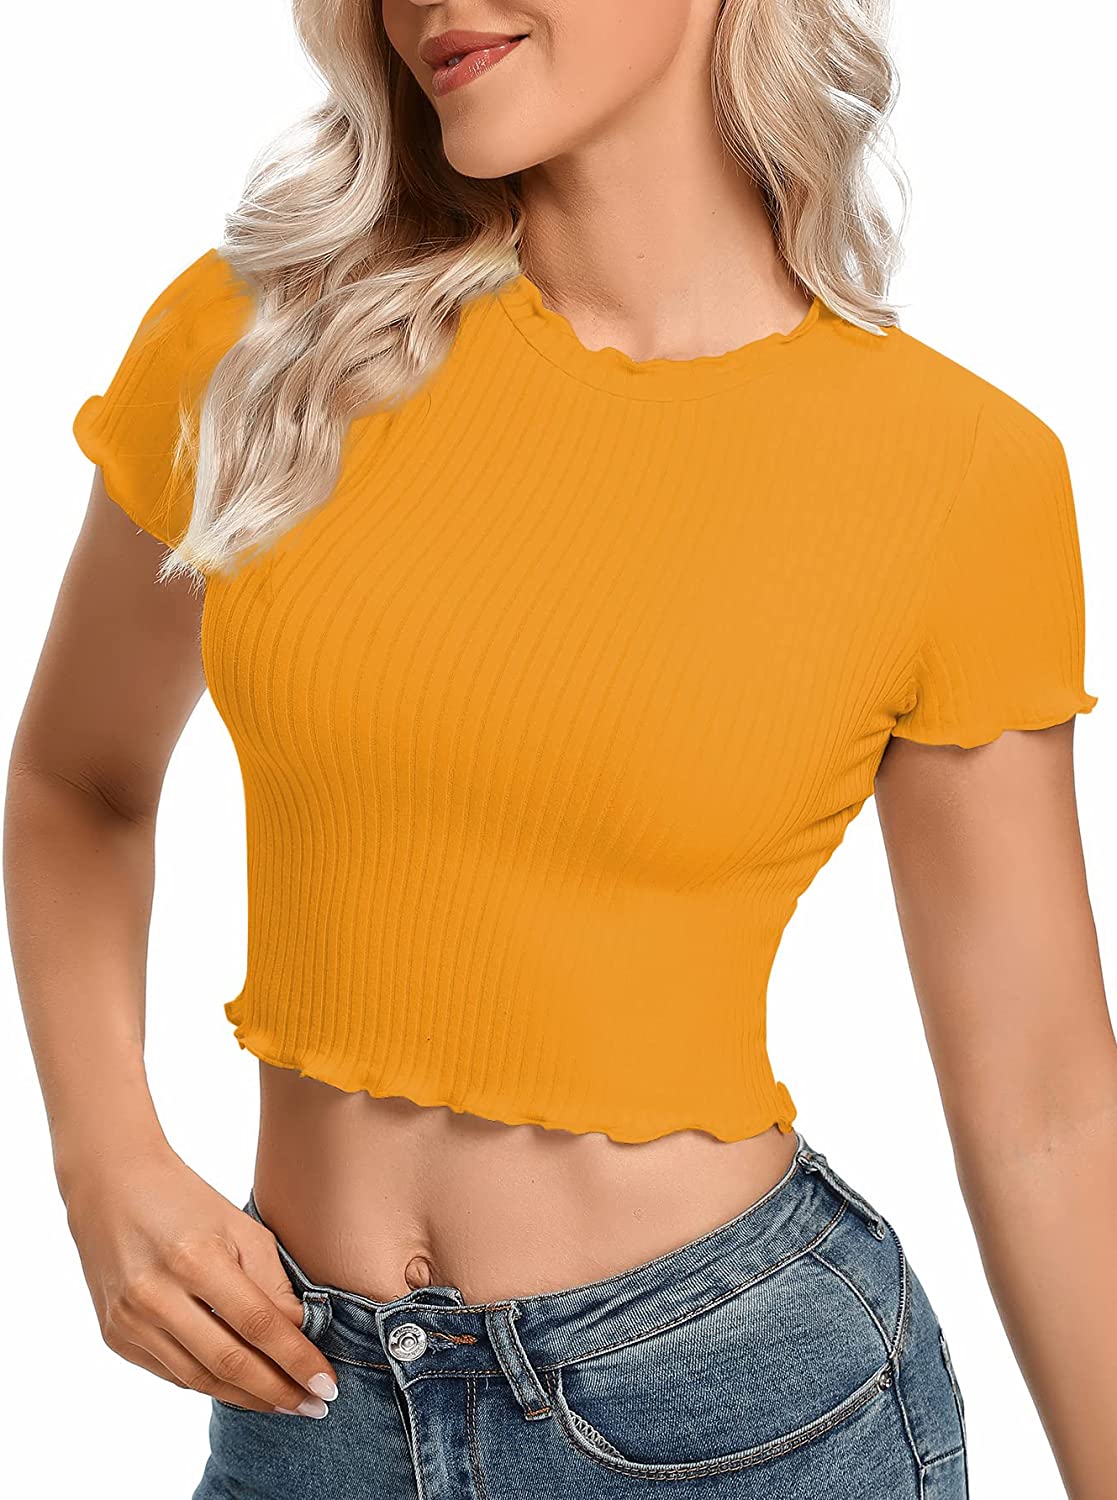 Fitted Short-Sleeve Cropped Rib-Knit T-Shirt for Women